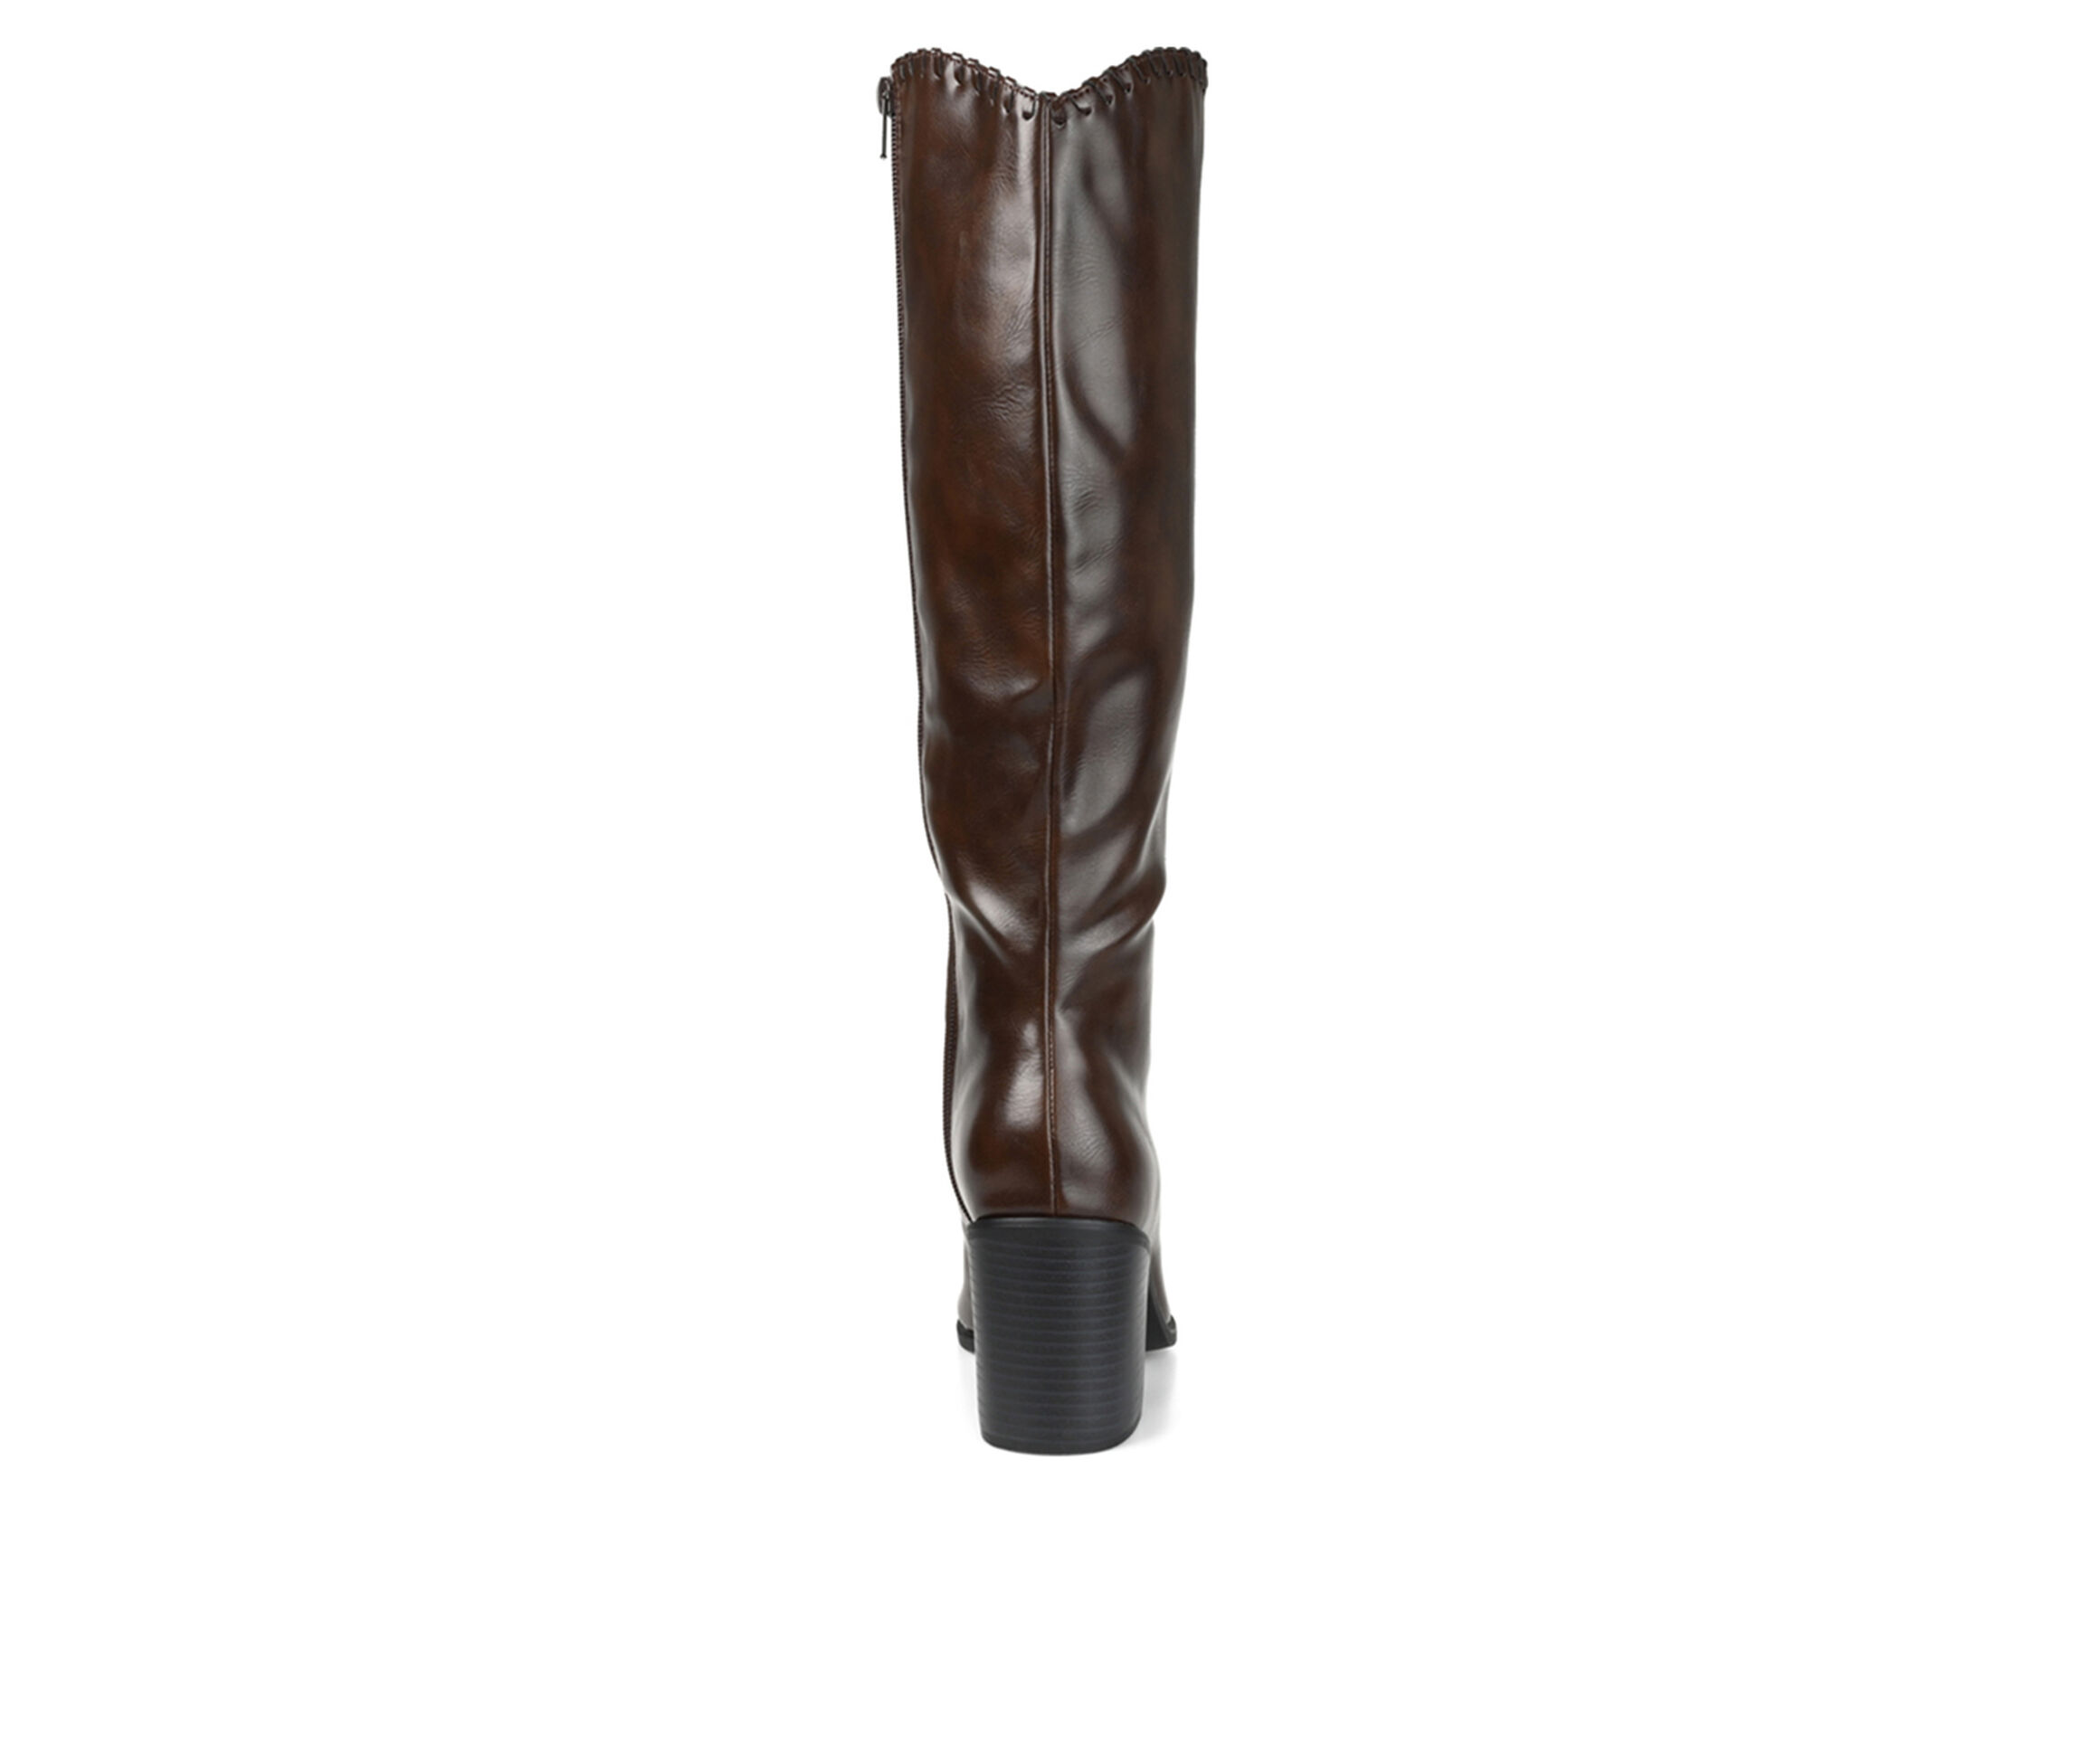 Women's Journee Collection Daria Extra Wide Calf Knee High Boot in Brown Size 8.5 Medium